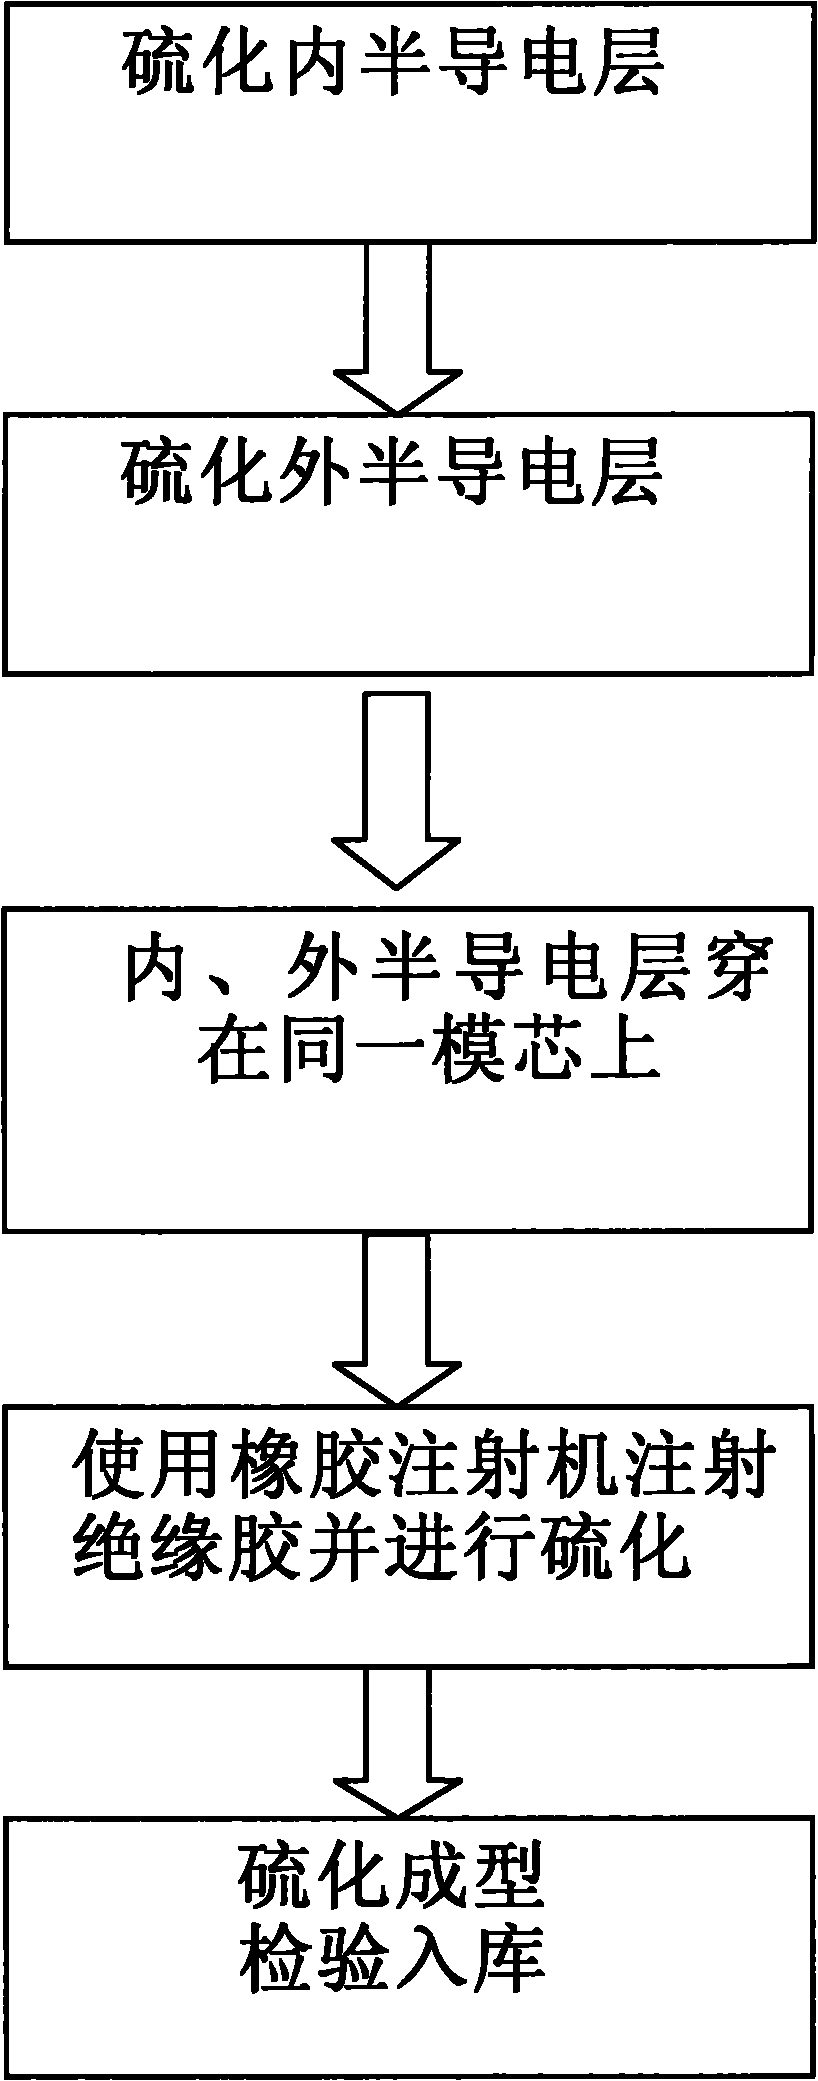 Preparation method for rubber cable connector